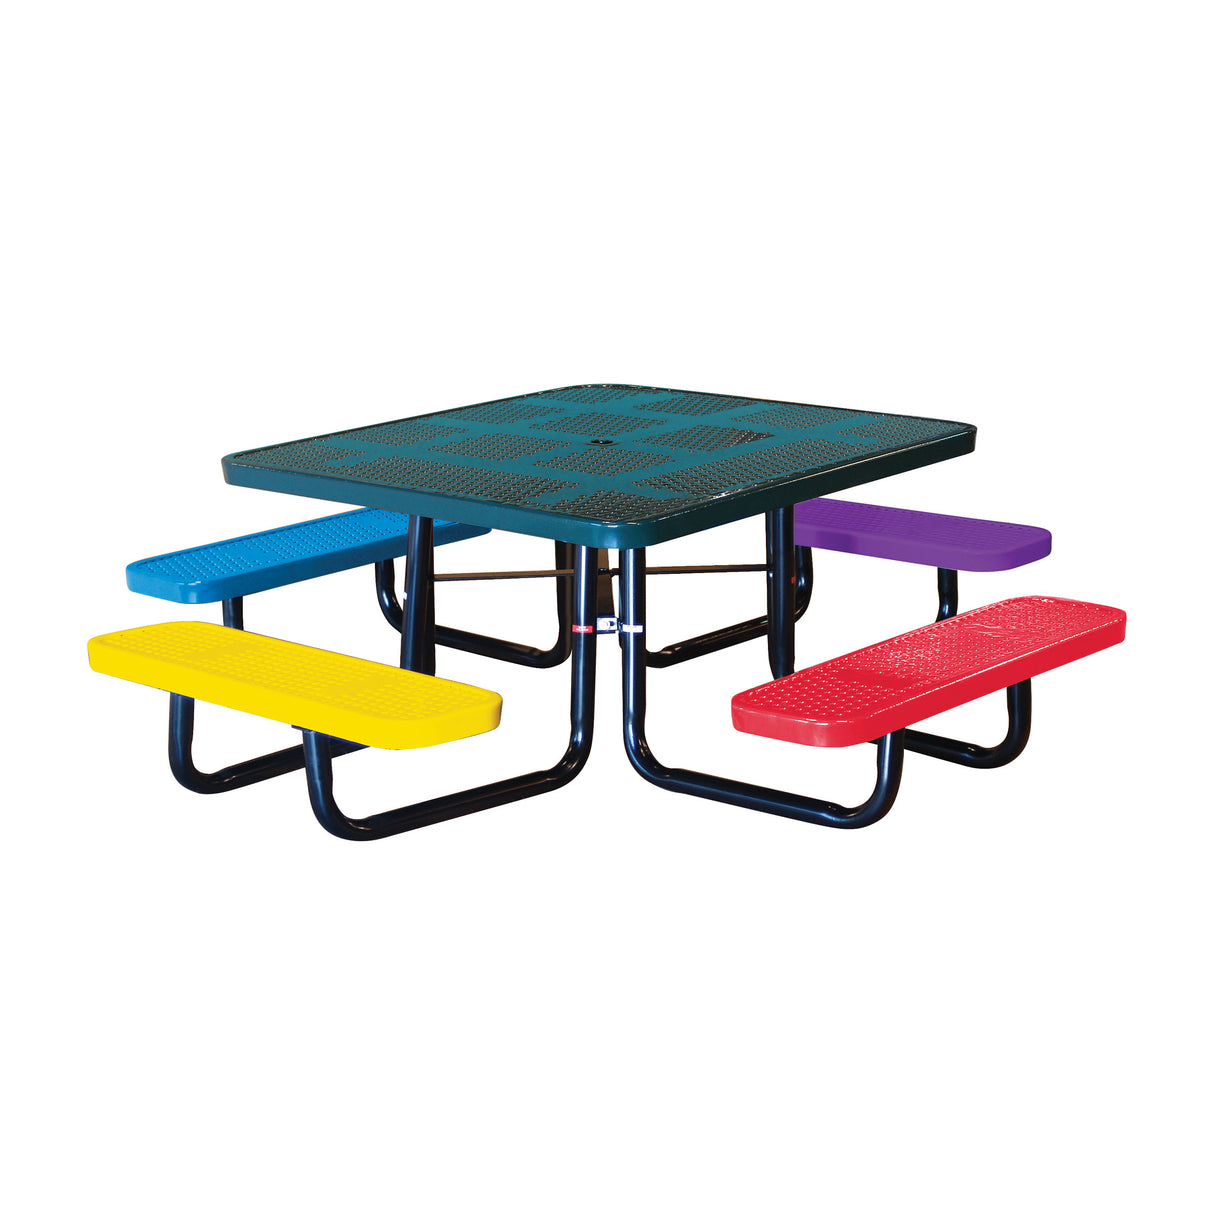 46" Square Perforated Children’s Tables